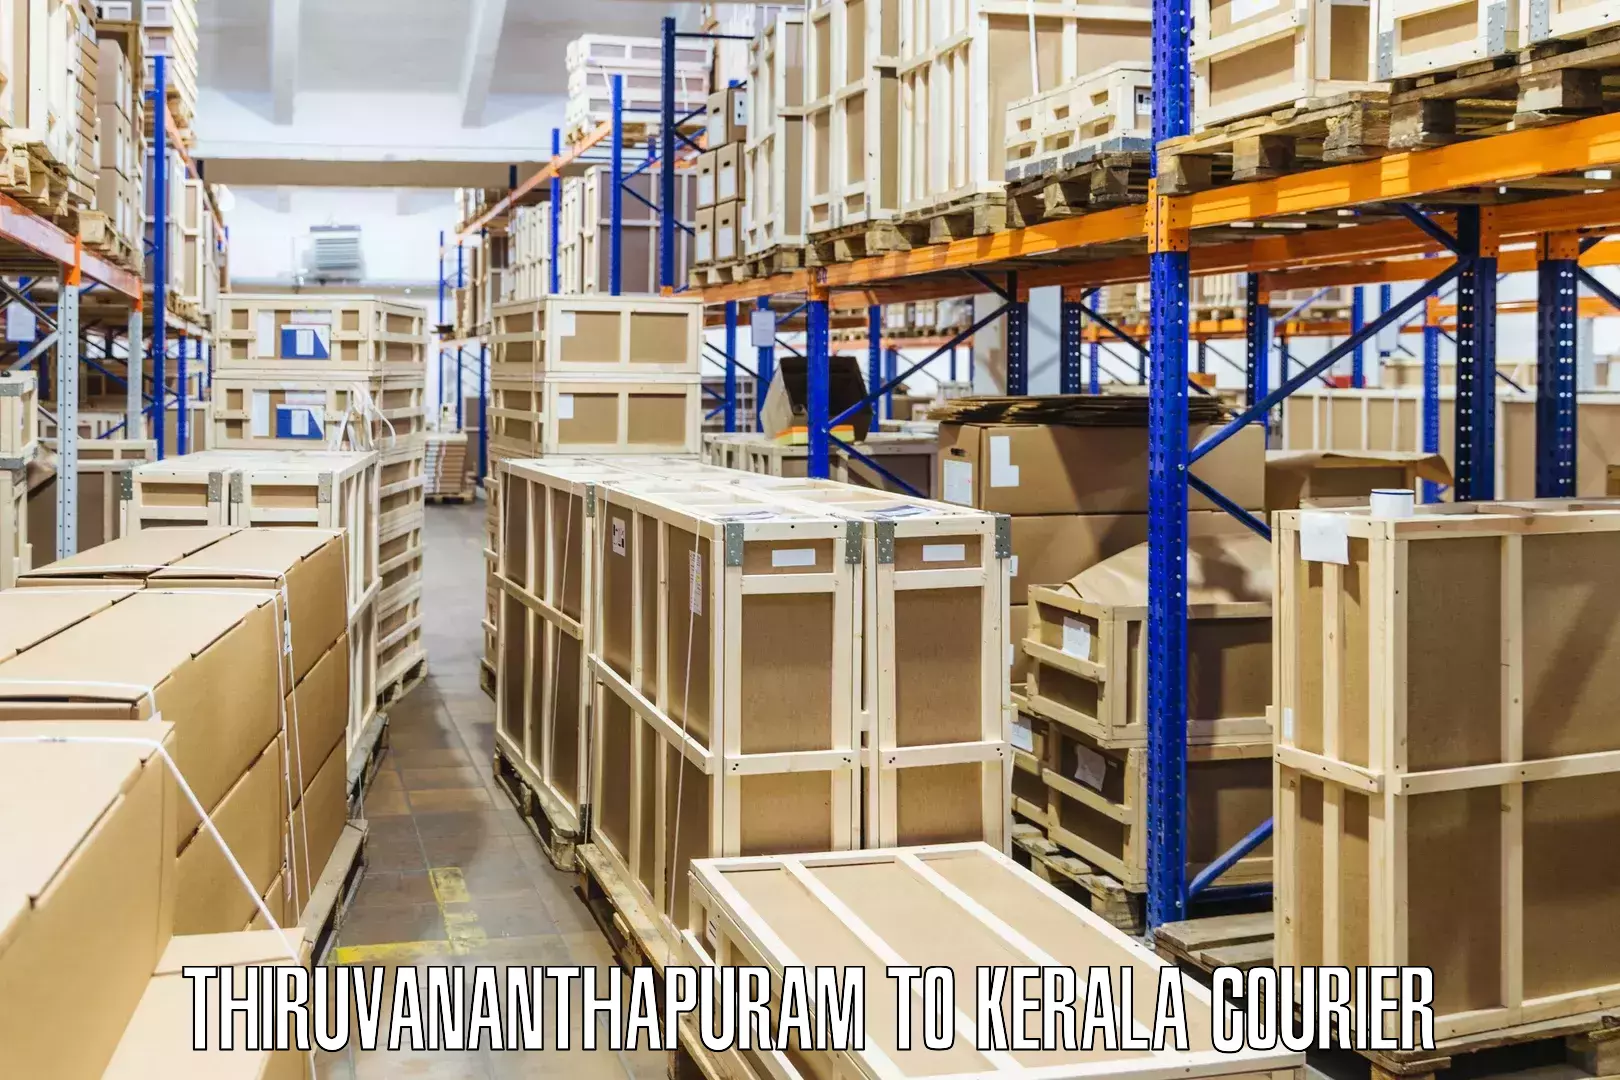 High-speed parcel service Thiruvananthapuram to Cochin University of Science and Technology